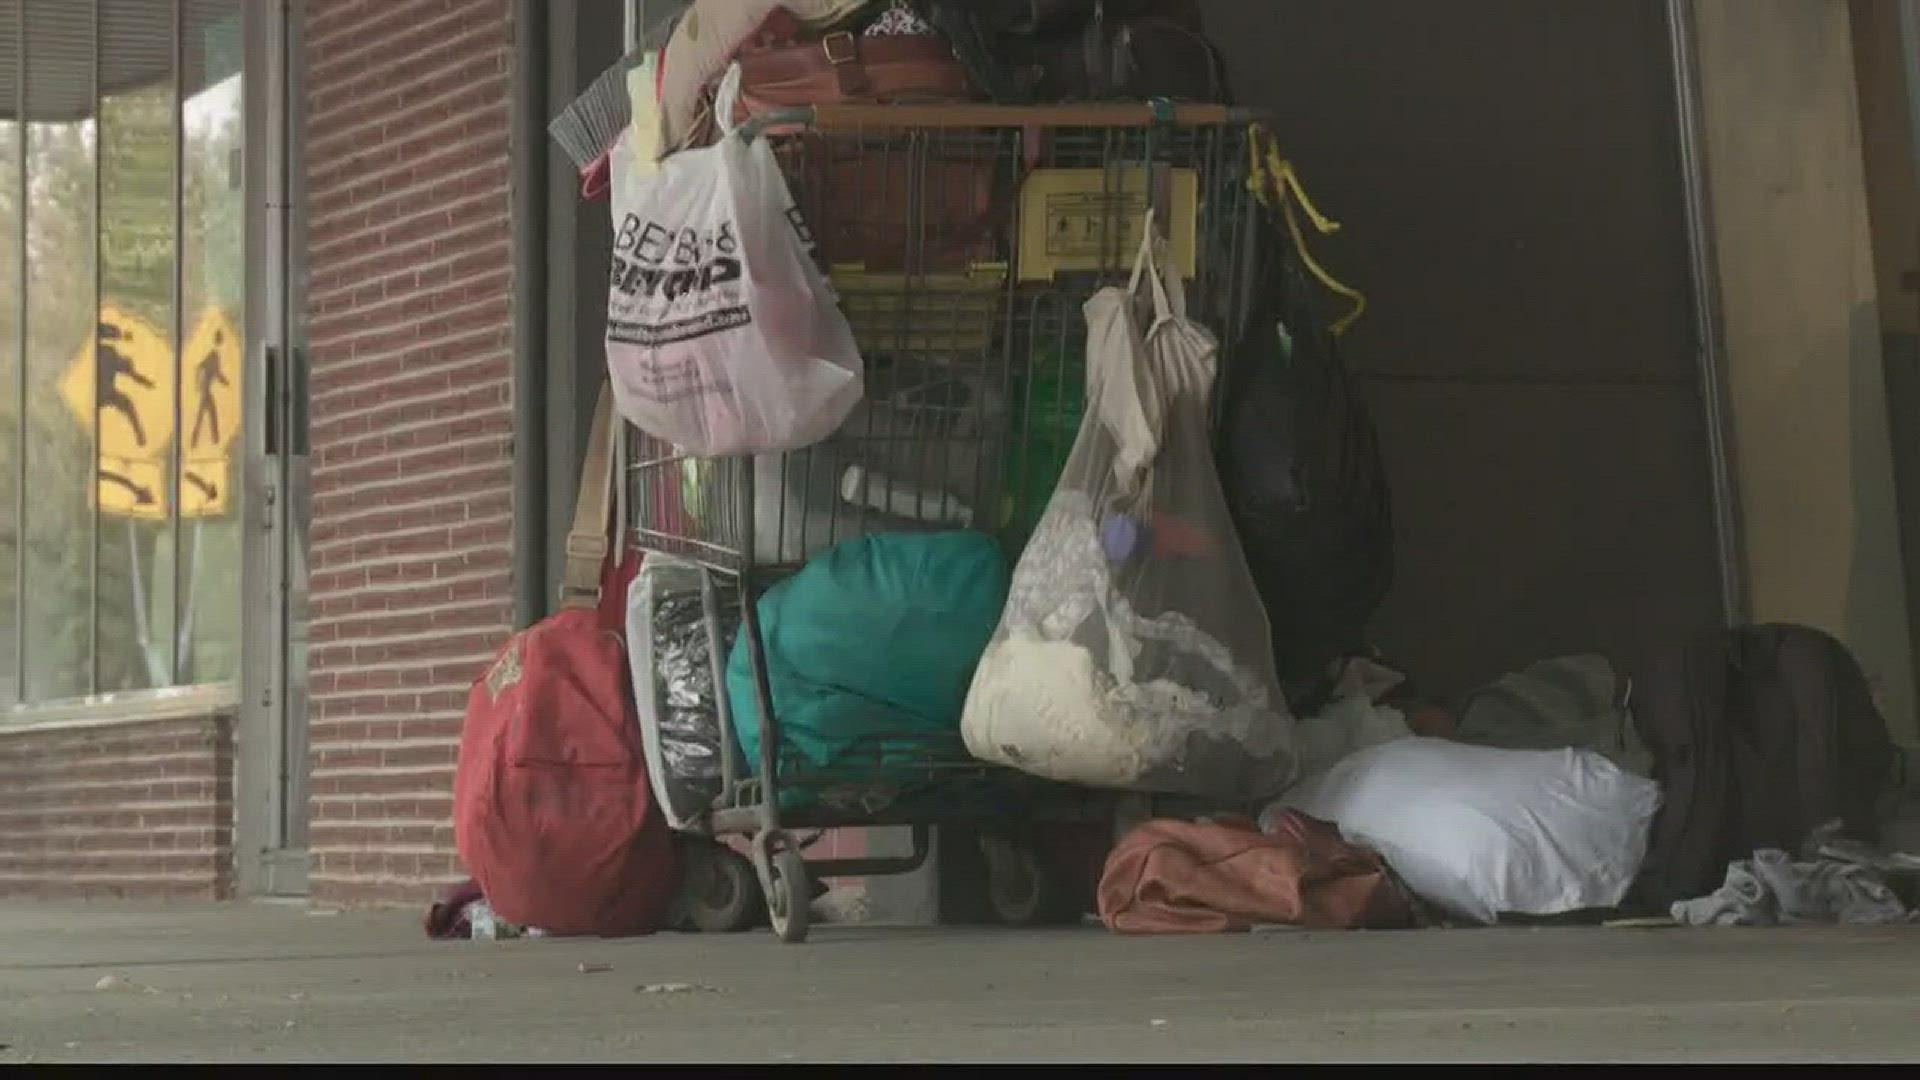 Land Park residents are raising awareness of homelessness and issues such as trash, needles, and feces through a Facebook group.